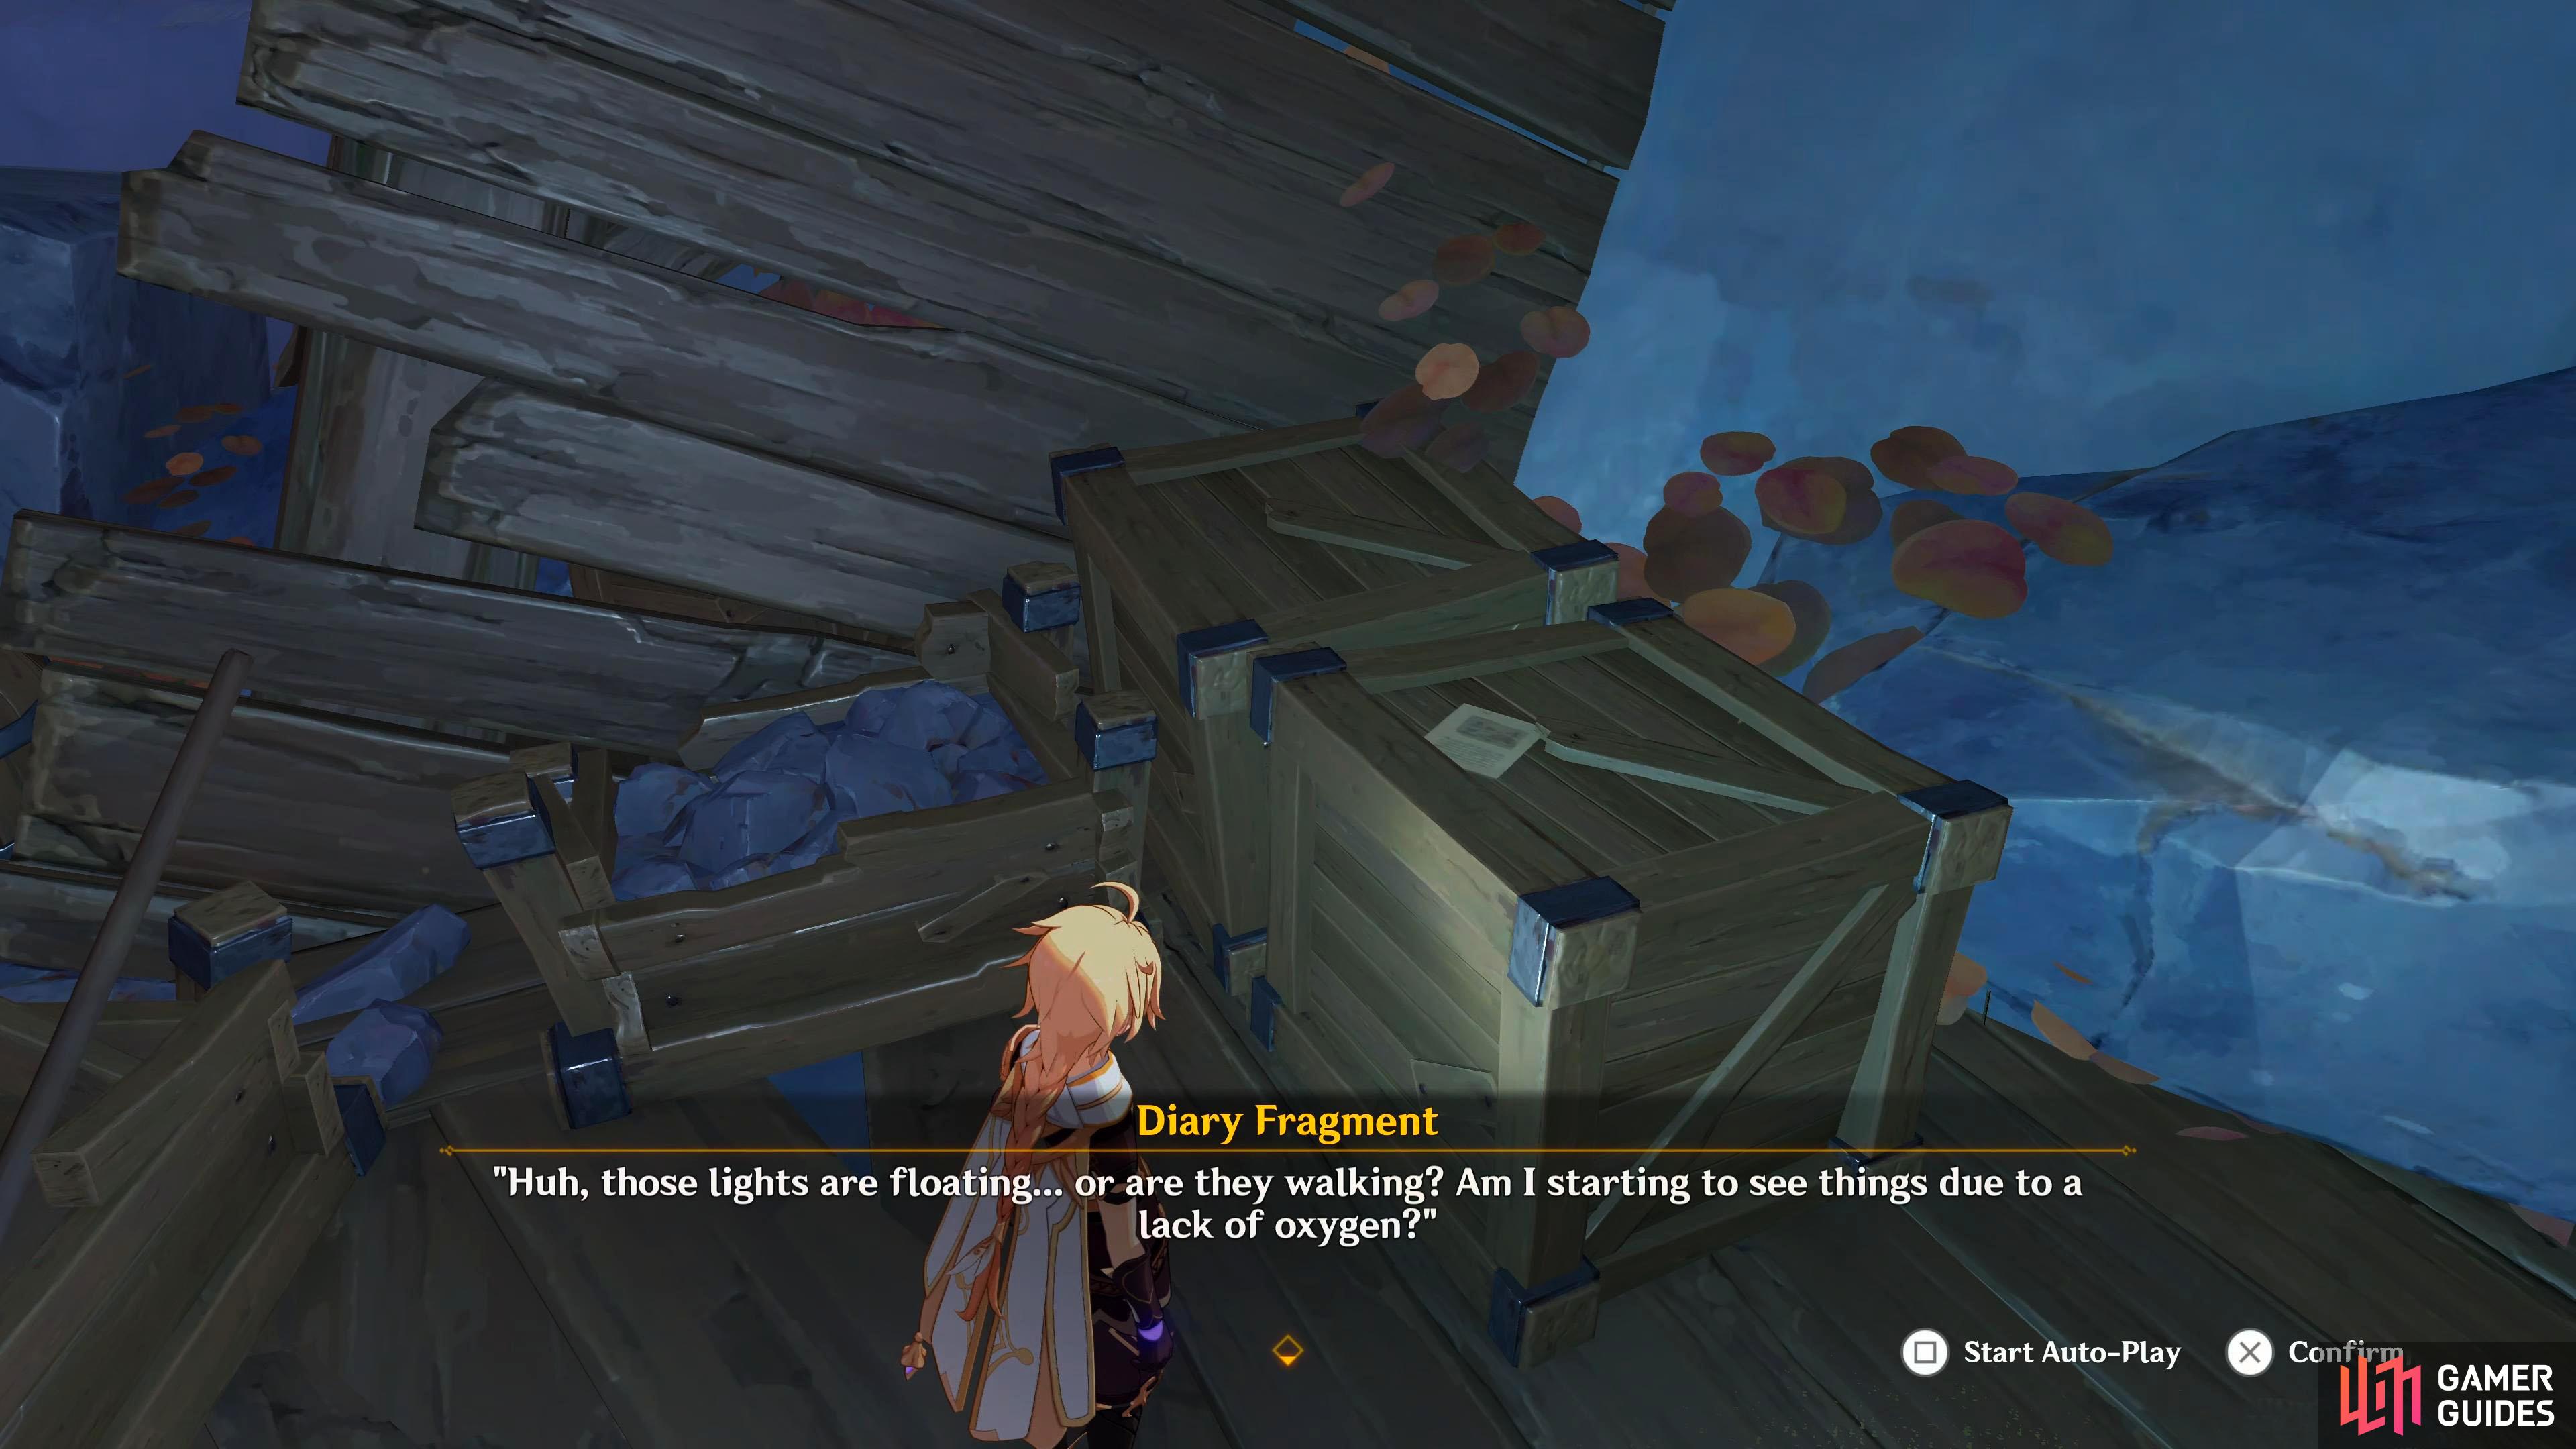 The first Diary Fragment can be found on th crates near the purple goo.